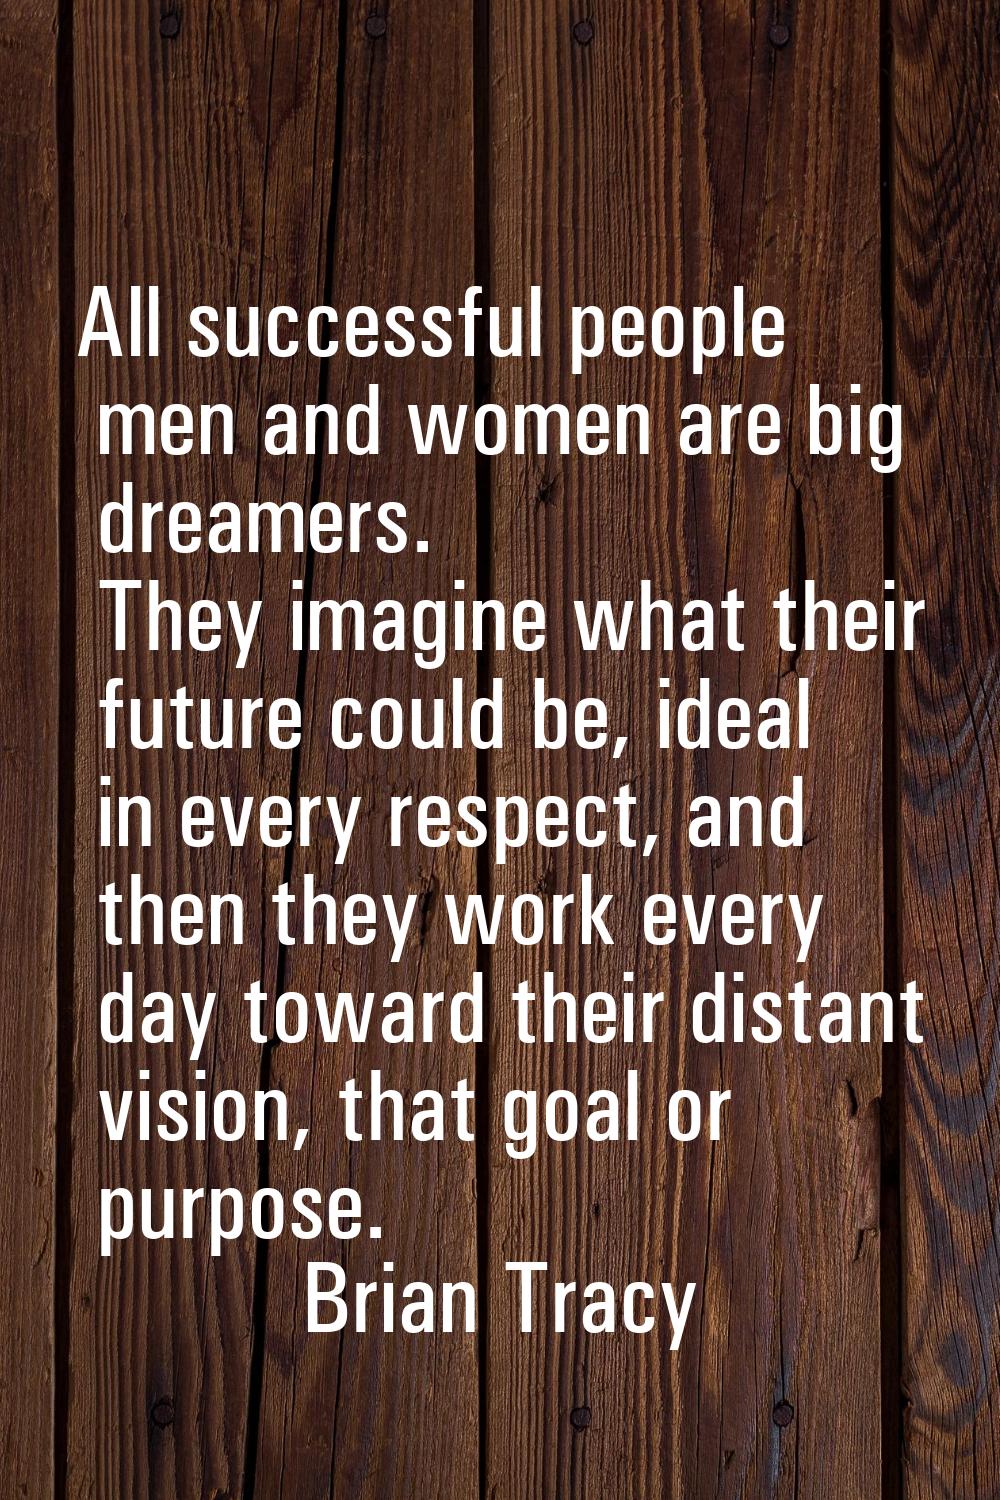 All successful people men and women are big dreamers. They imagine what their future could be, idea